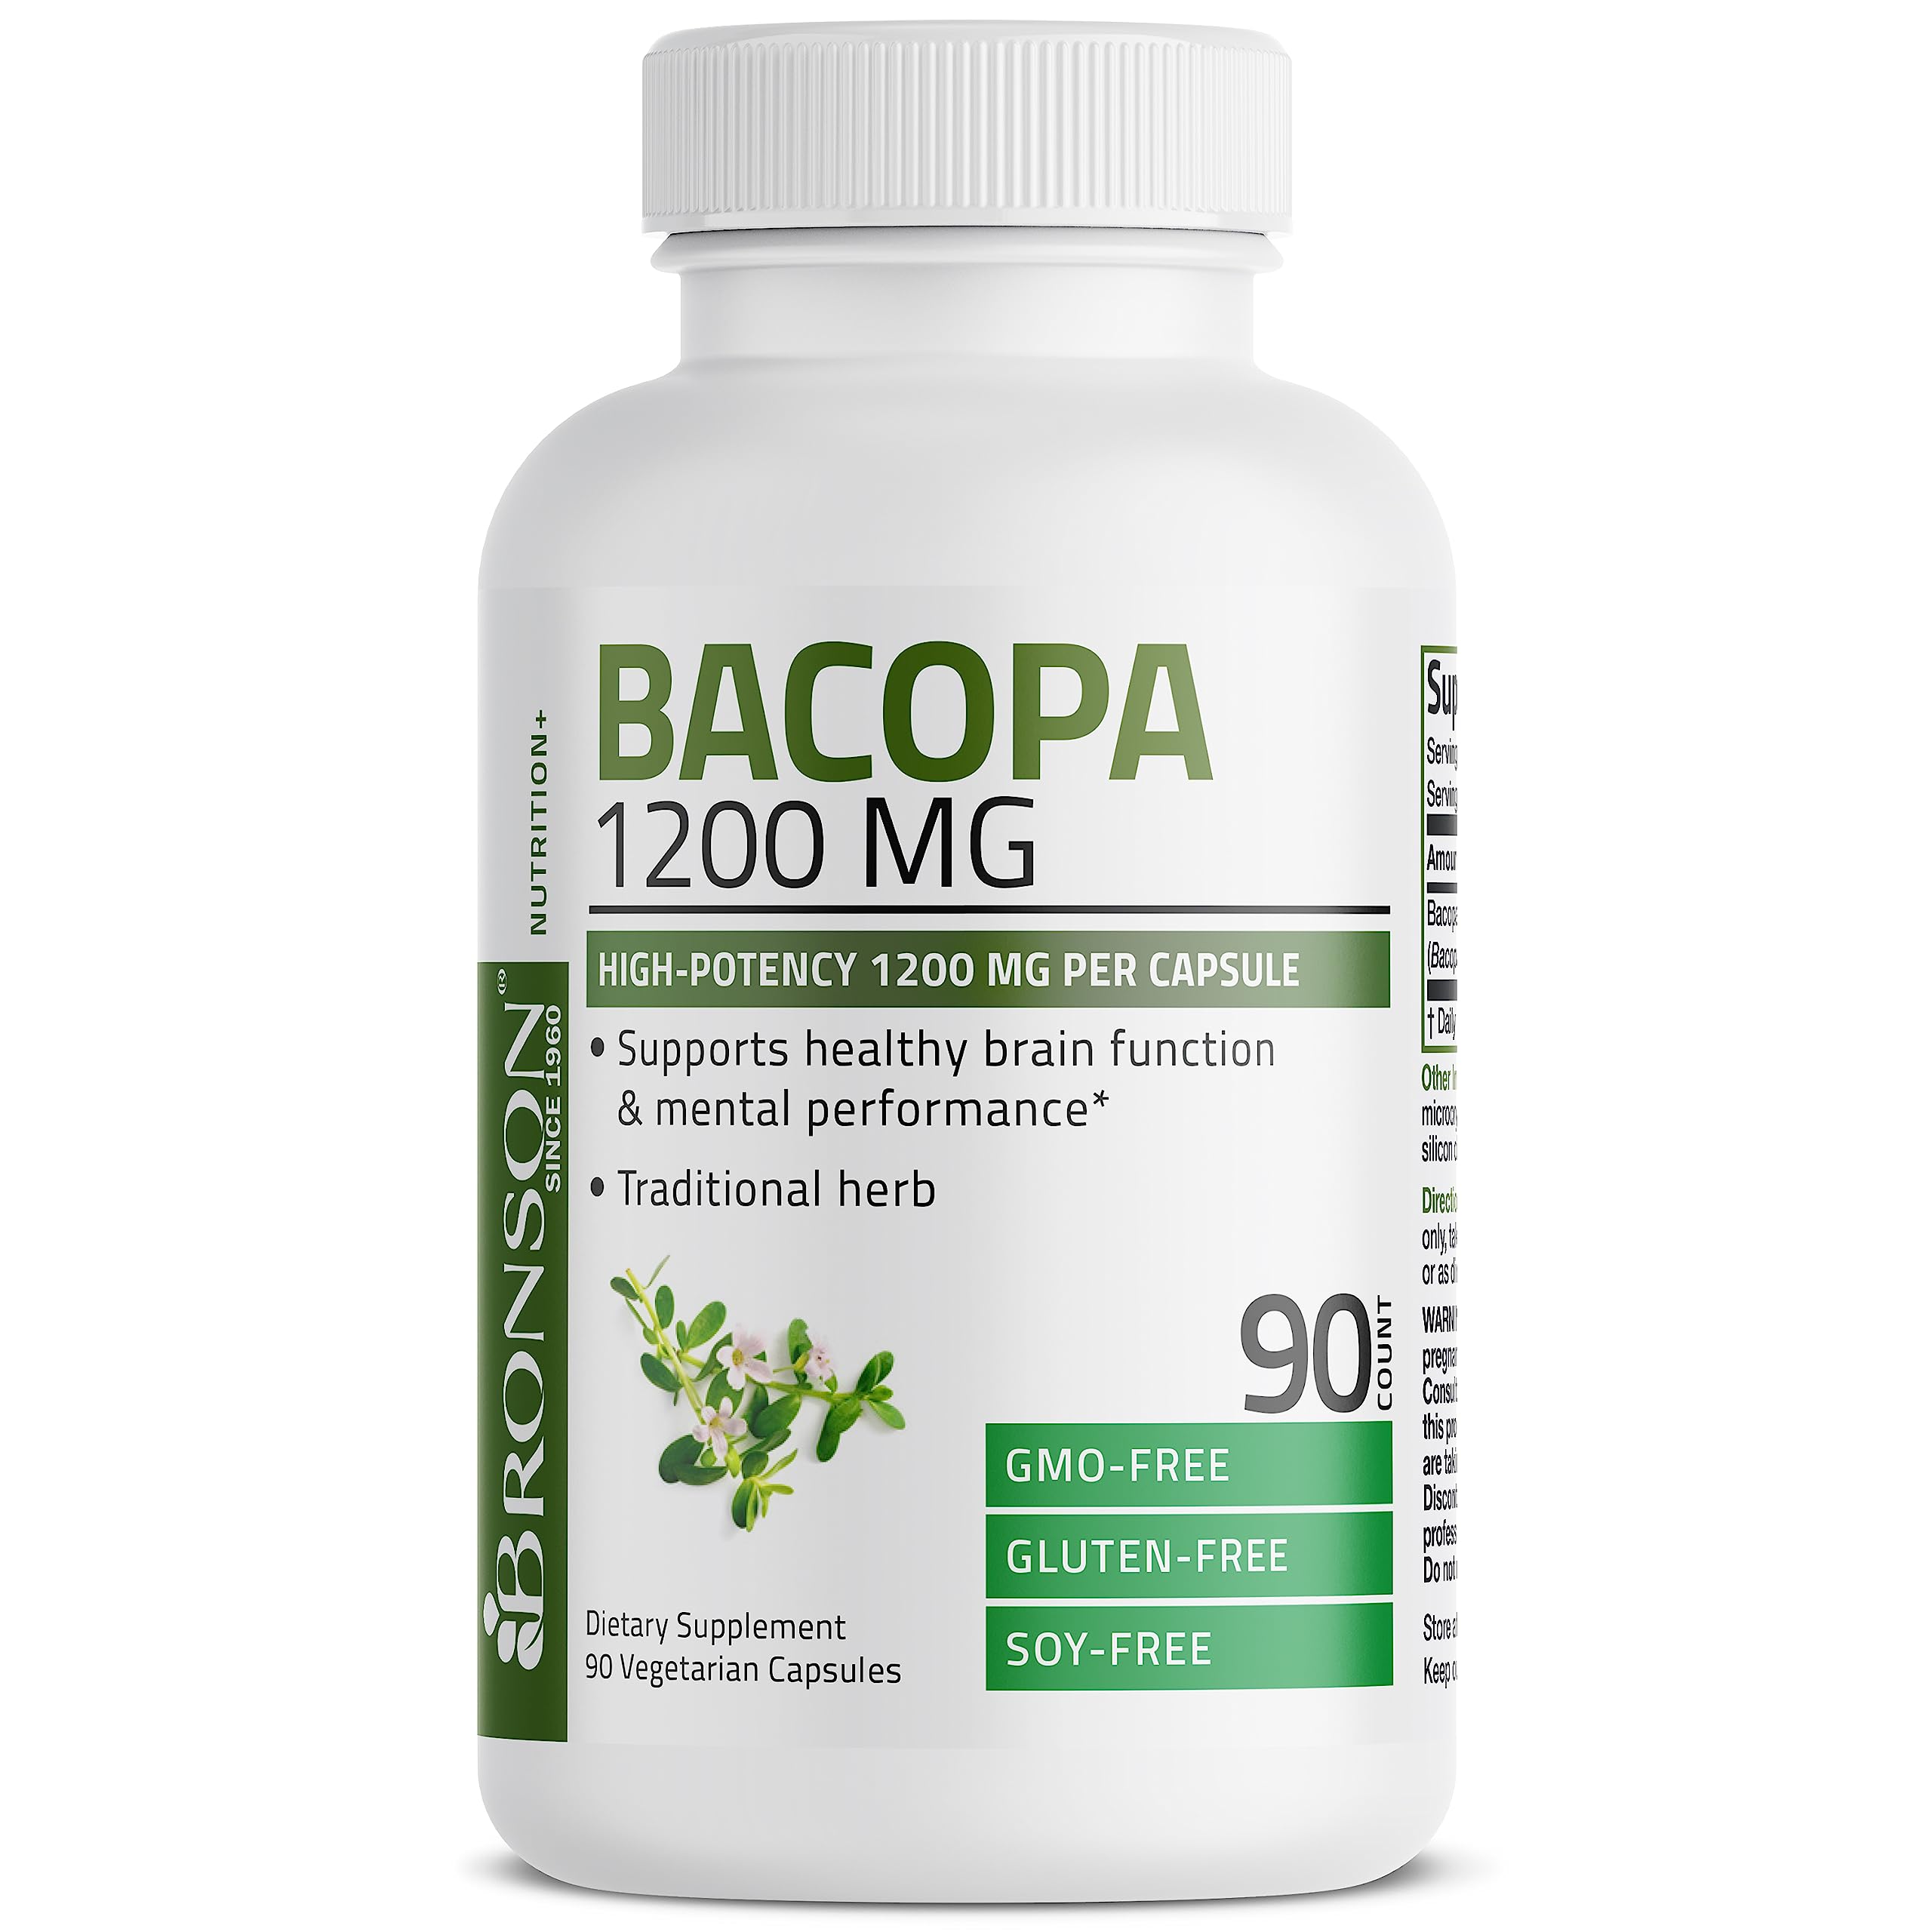 Bronson Bacopa 1200 MG Supports Healthy Brain Function and Mental Performance, Traditional Herb, Non-GMO, 90 Vegetarian Capsules